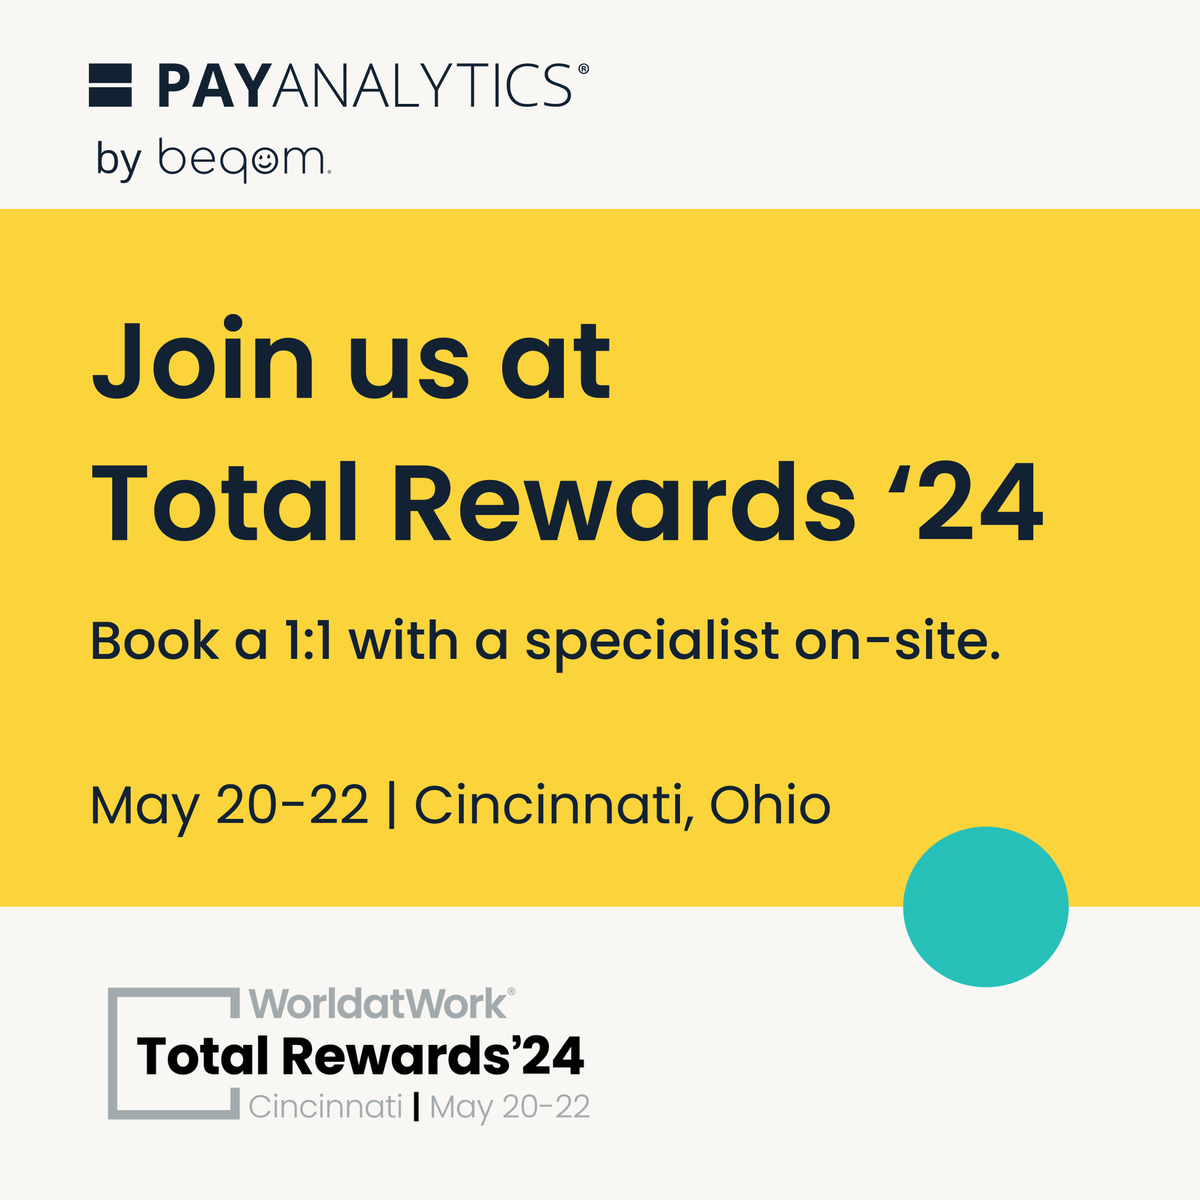 PayAnalytics by beqom will be at WorldatWork's #TotalRewards24 from May 20-22 in Cincinnati, Ohio. Make sure to drop by booth 202 for a chat!
You can book an on-site 1:1 meeting with one of our #FairPay ⚖️ specialists: eu1.hubs.ly/H08-3MS0
We look forward to seeing you! 🚀